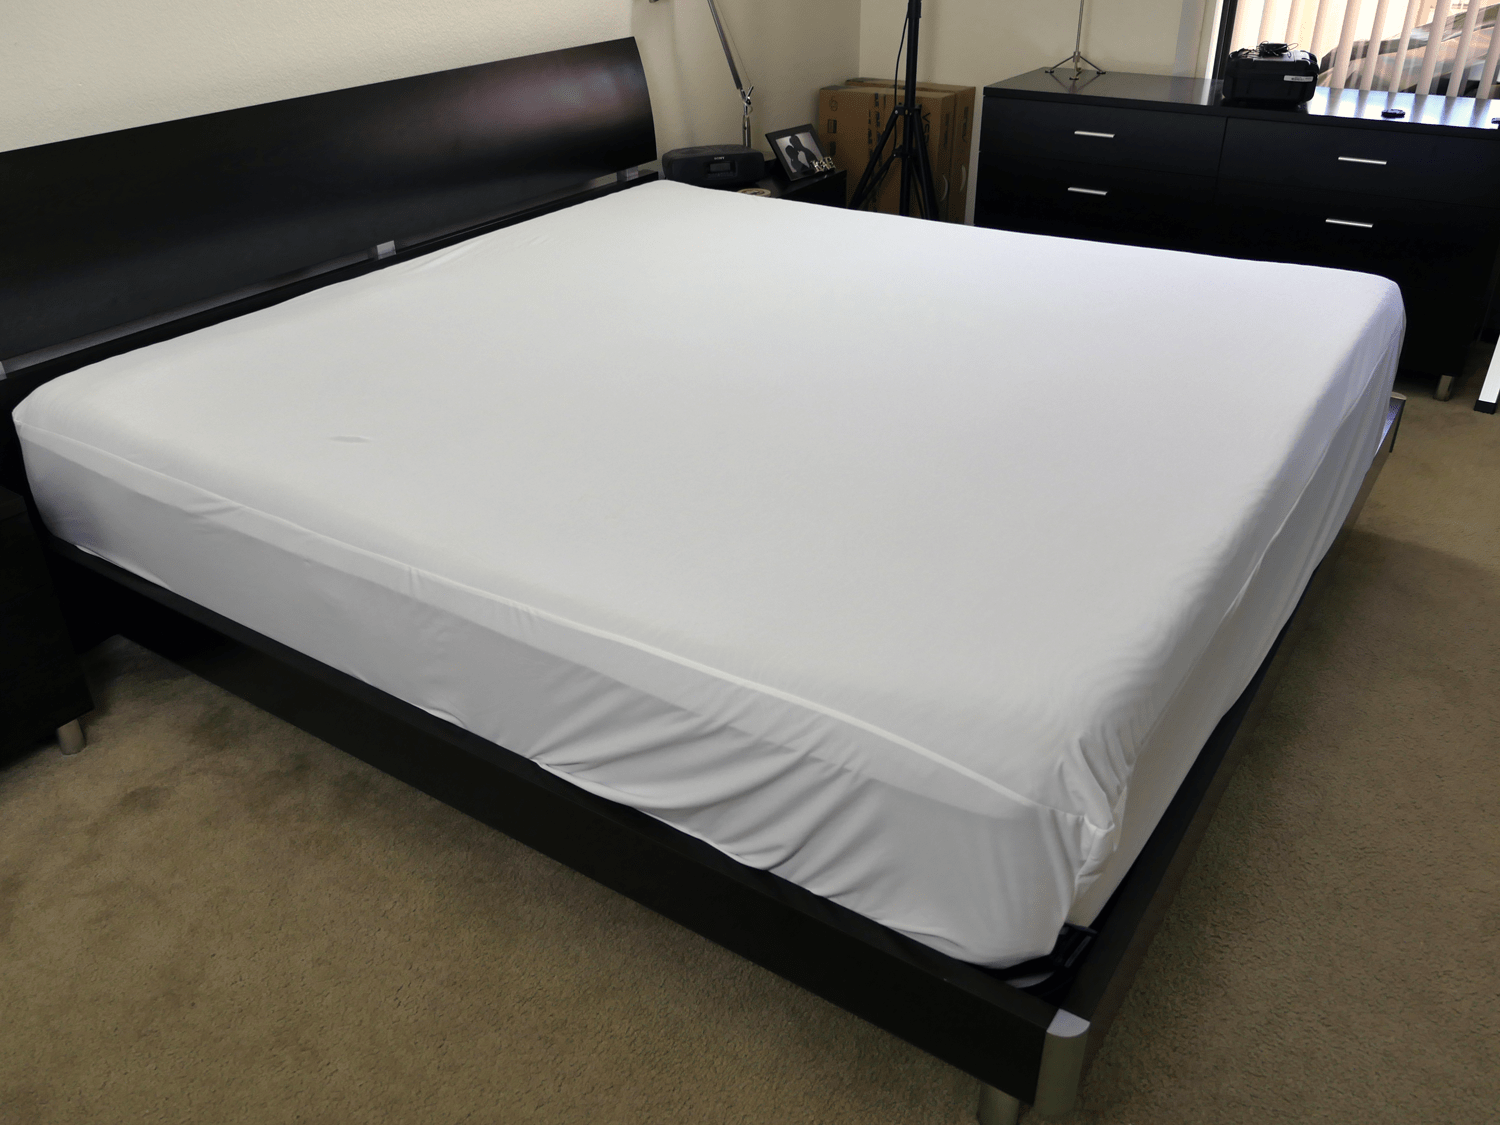 Double Vinyl Plastic Fitted Mattress Bed Cover Sheet Protector 